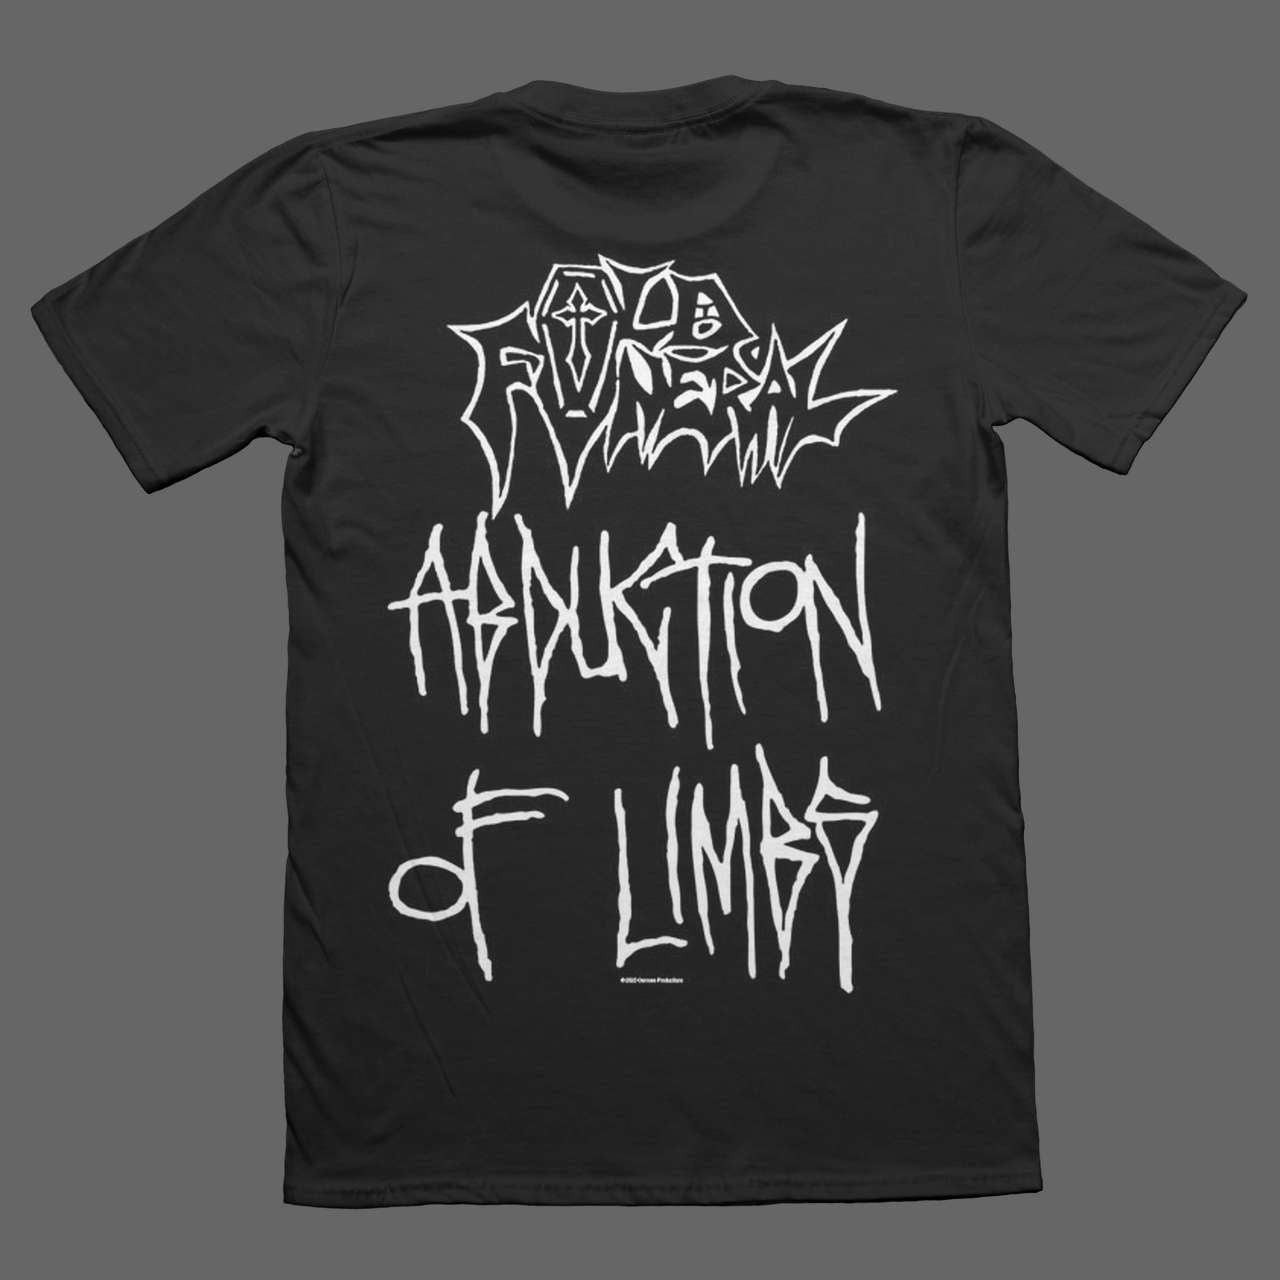 Old Funeral - Abduction of Limbs (T-Shirt)